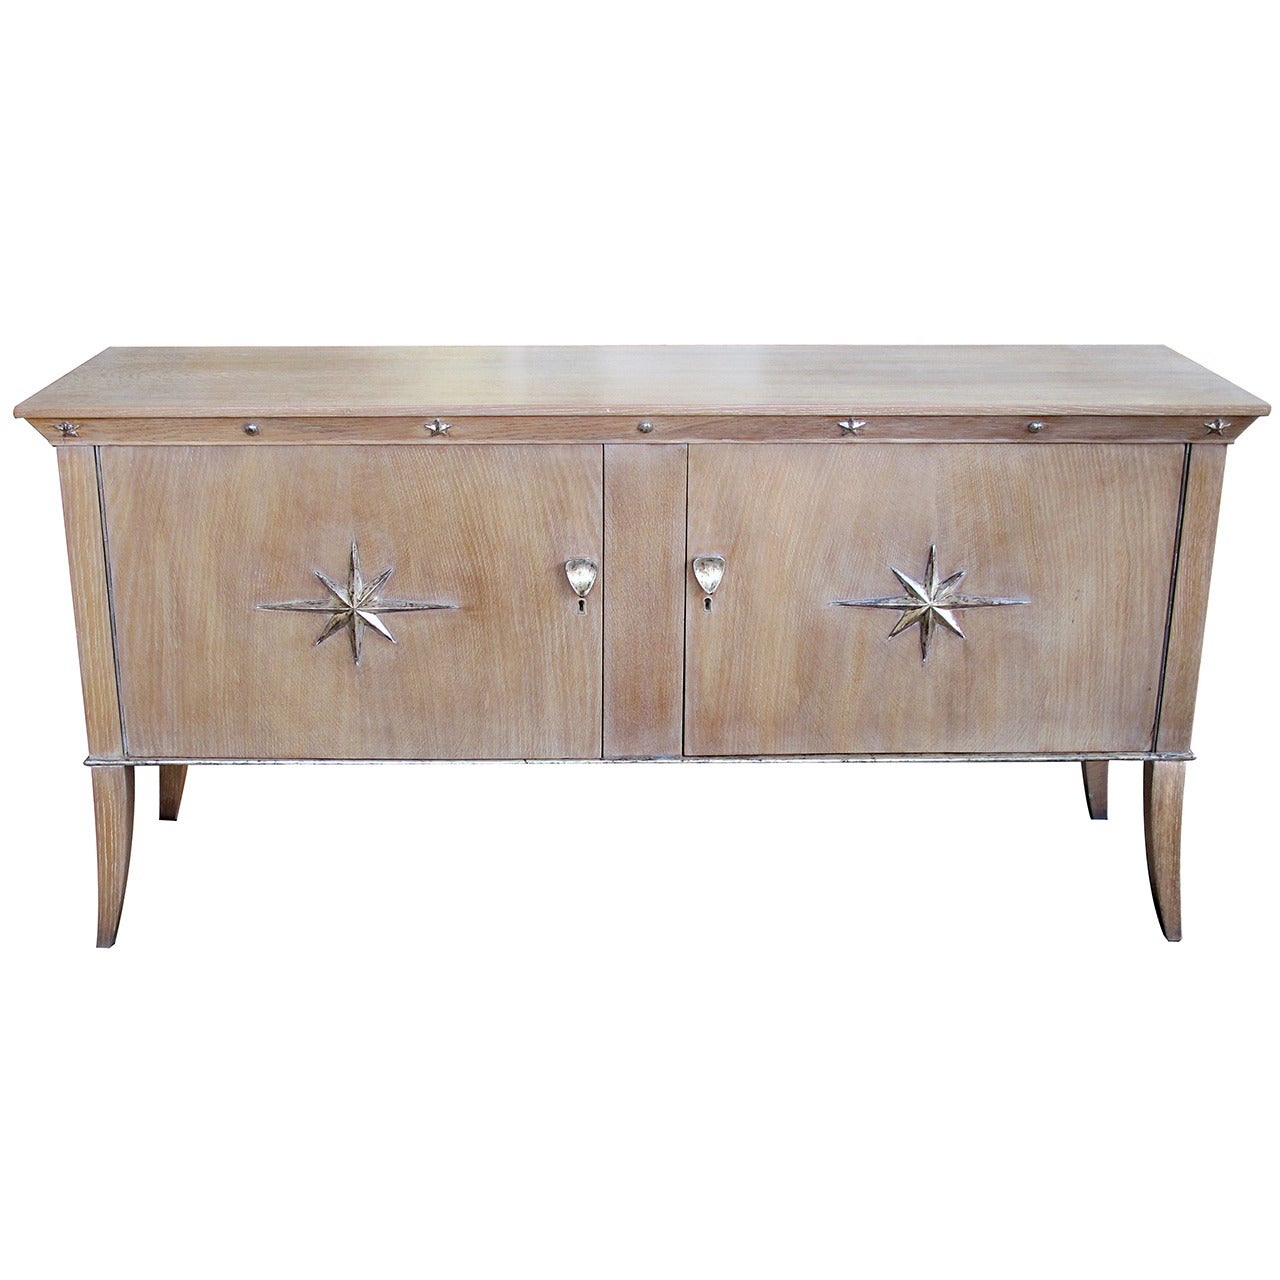 Stylish French Two-Door Cerused Oak Sideboard with Silver Leaf Motifs For Sale